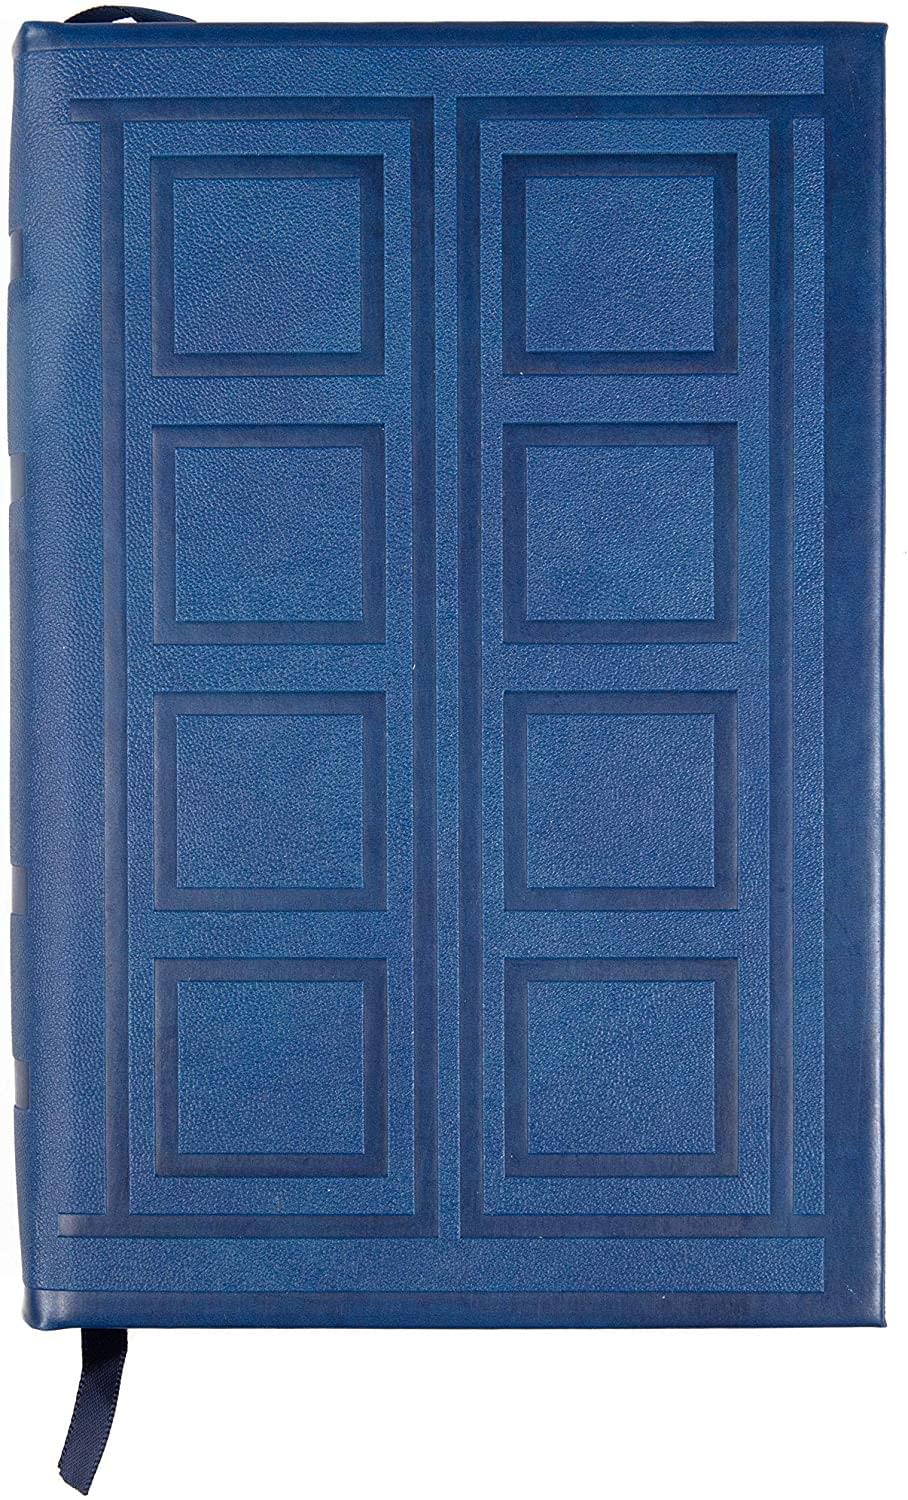 Doctor Who River Song 200 Page Hardcover Journal